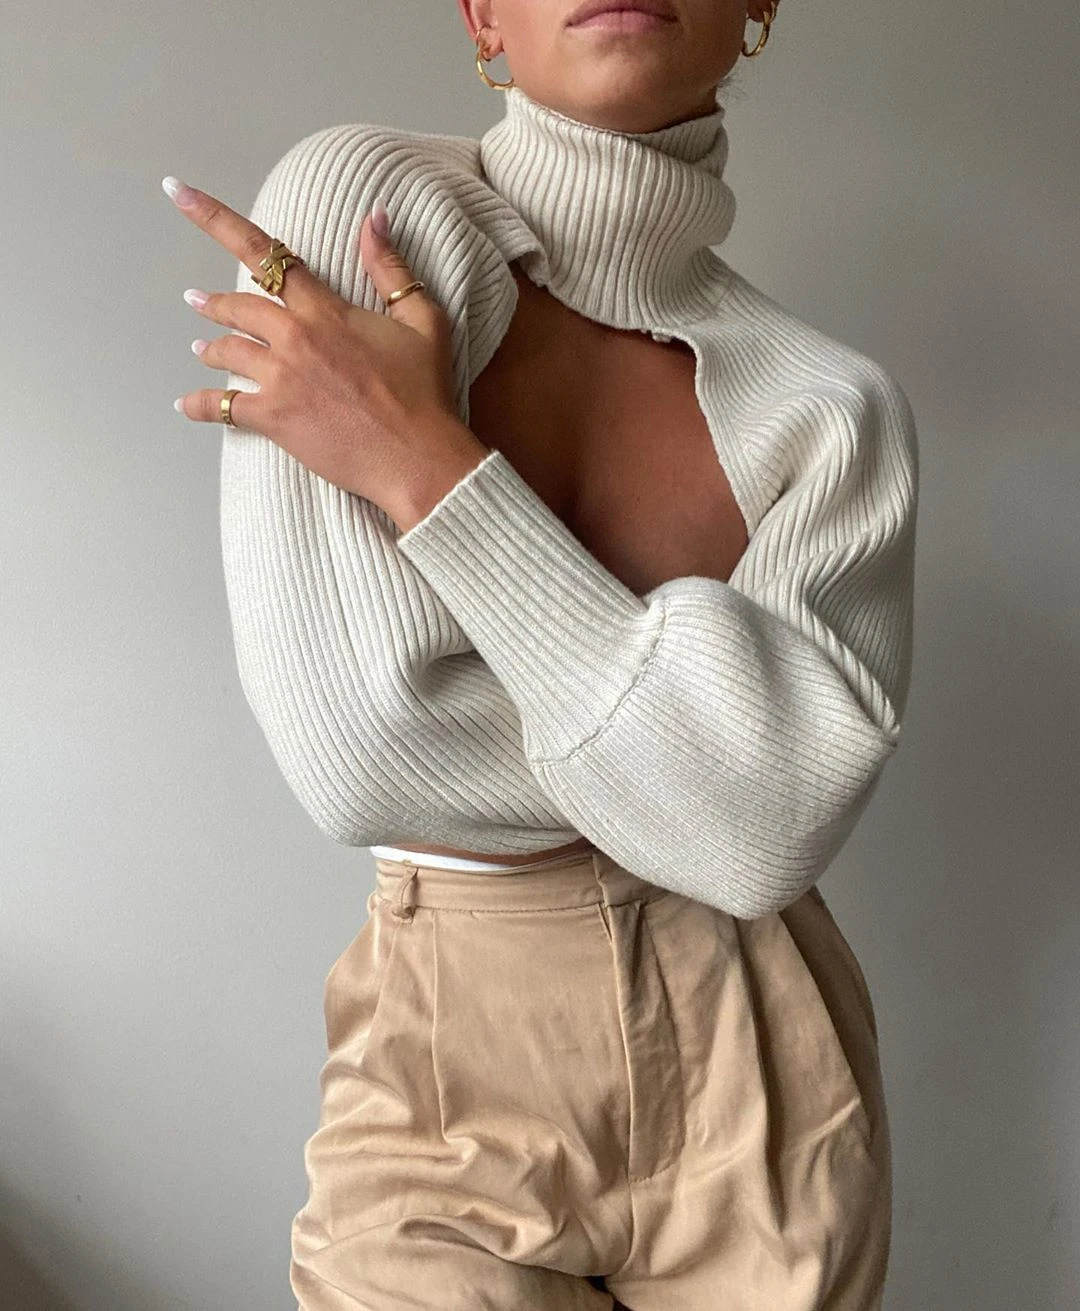 Female Sweater Solid High Collar Long Puff Sleeve Knitwear Pullover for Women Apring Autumn Y2K Aesthetic Crop Top Halter Top